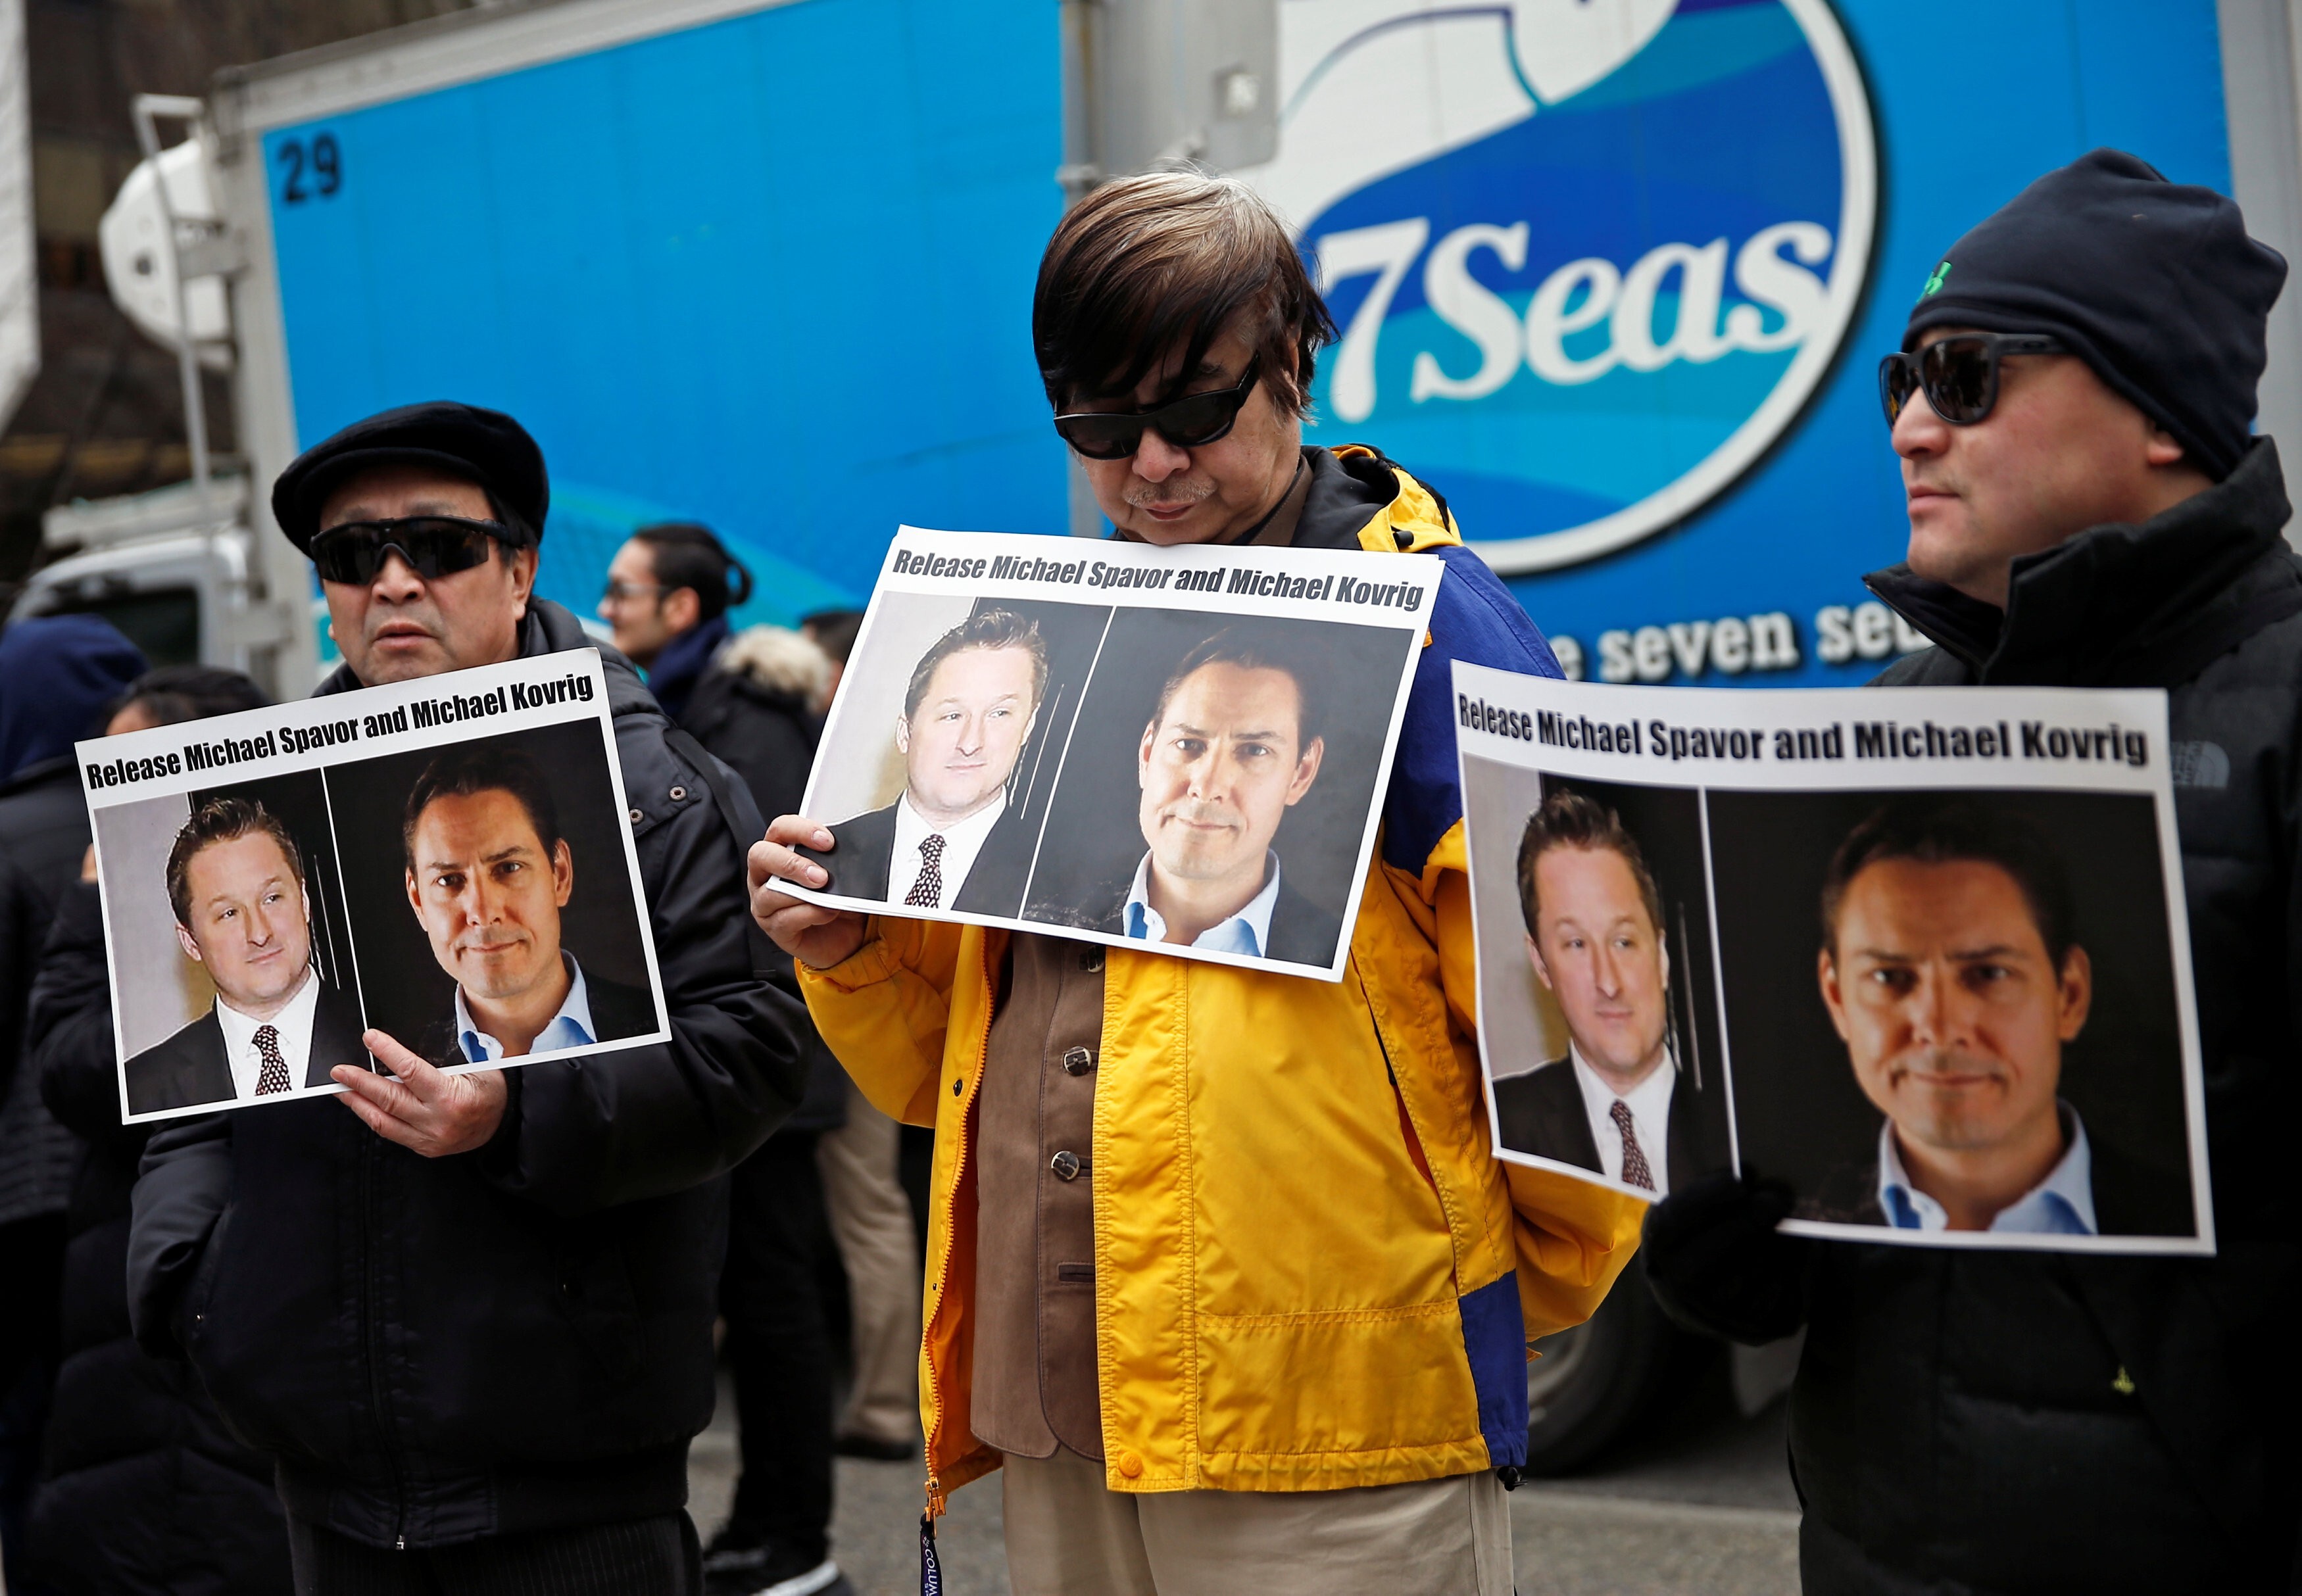 People hold placards calling for China to release Canadian detainees Michael Spavor and Michael Kovrig outside a court hearing for Huawei executive Meng Wanzhou in Vancouver, British Columbia, Canada, in March 2019. Photo: Reuters